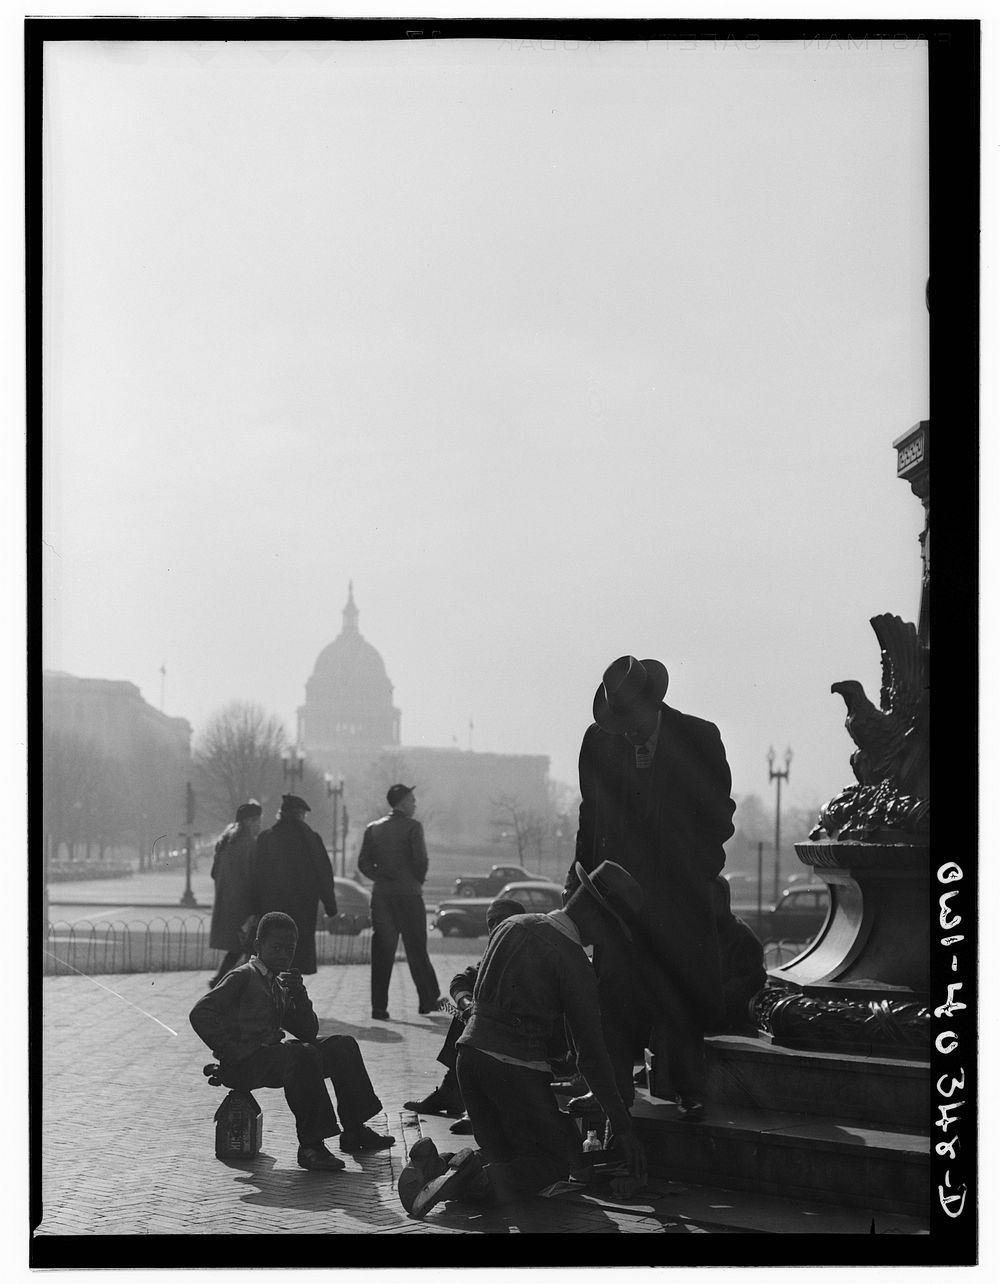 [Untitled photo, possibly related to: Washington, D.C., in front of Union Station.]. Sourced from the Library of Congress.